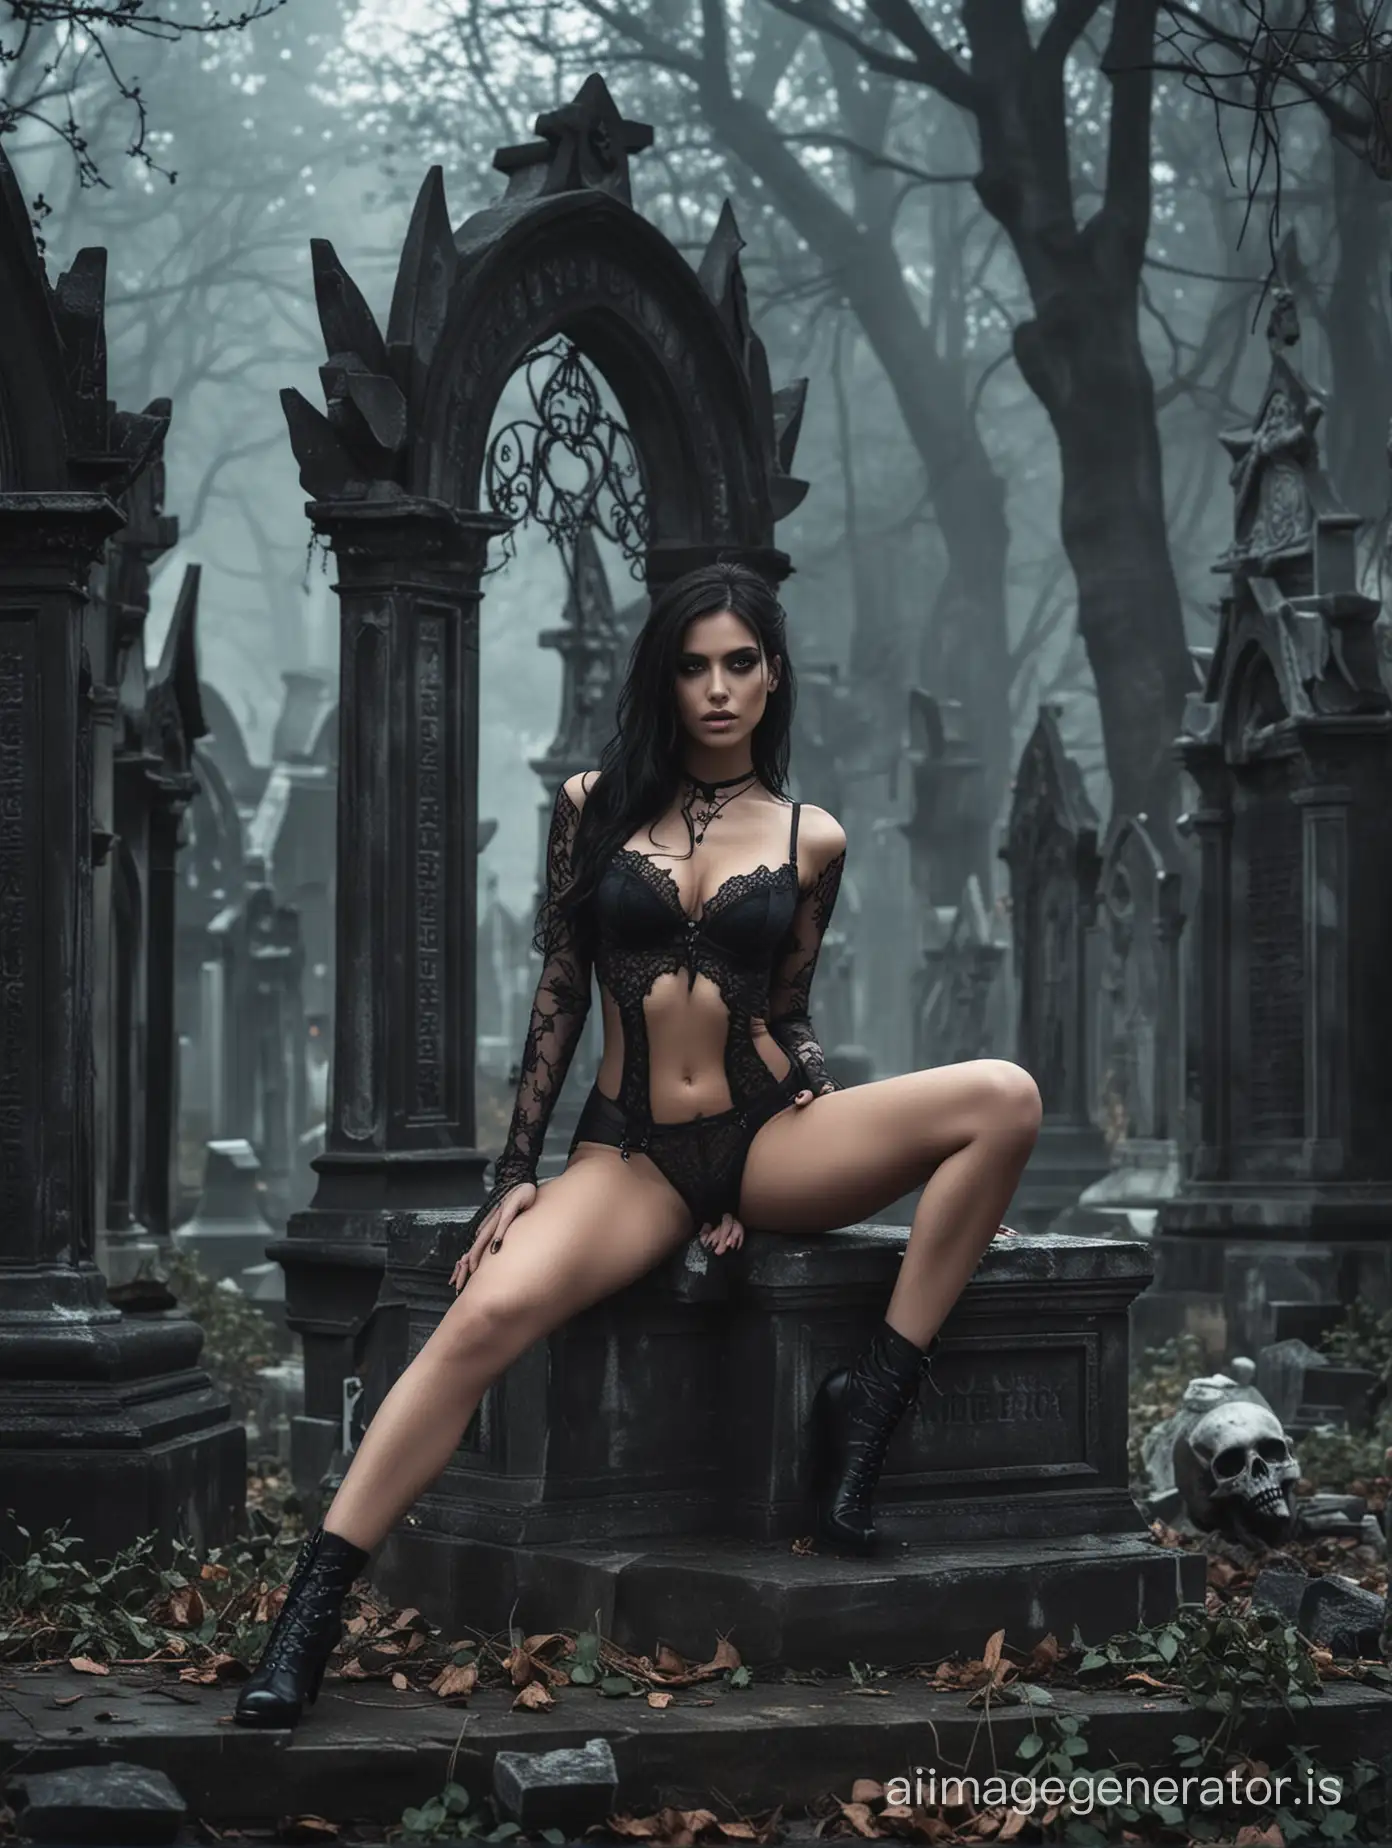 dark gothic girl in lingerie with nice body proportion, sitting on her knee with a sexy temptation look on her face, she is beautiful and looks like a Victoria's Secret model, standing in a graveyard filled with demons behind her